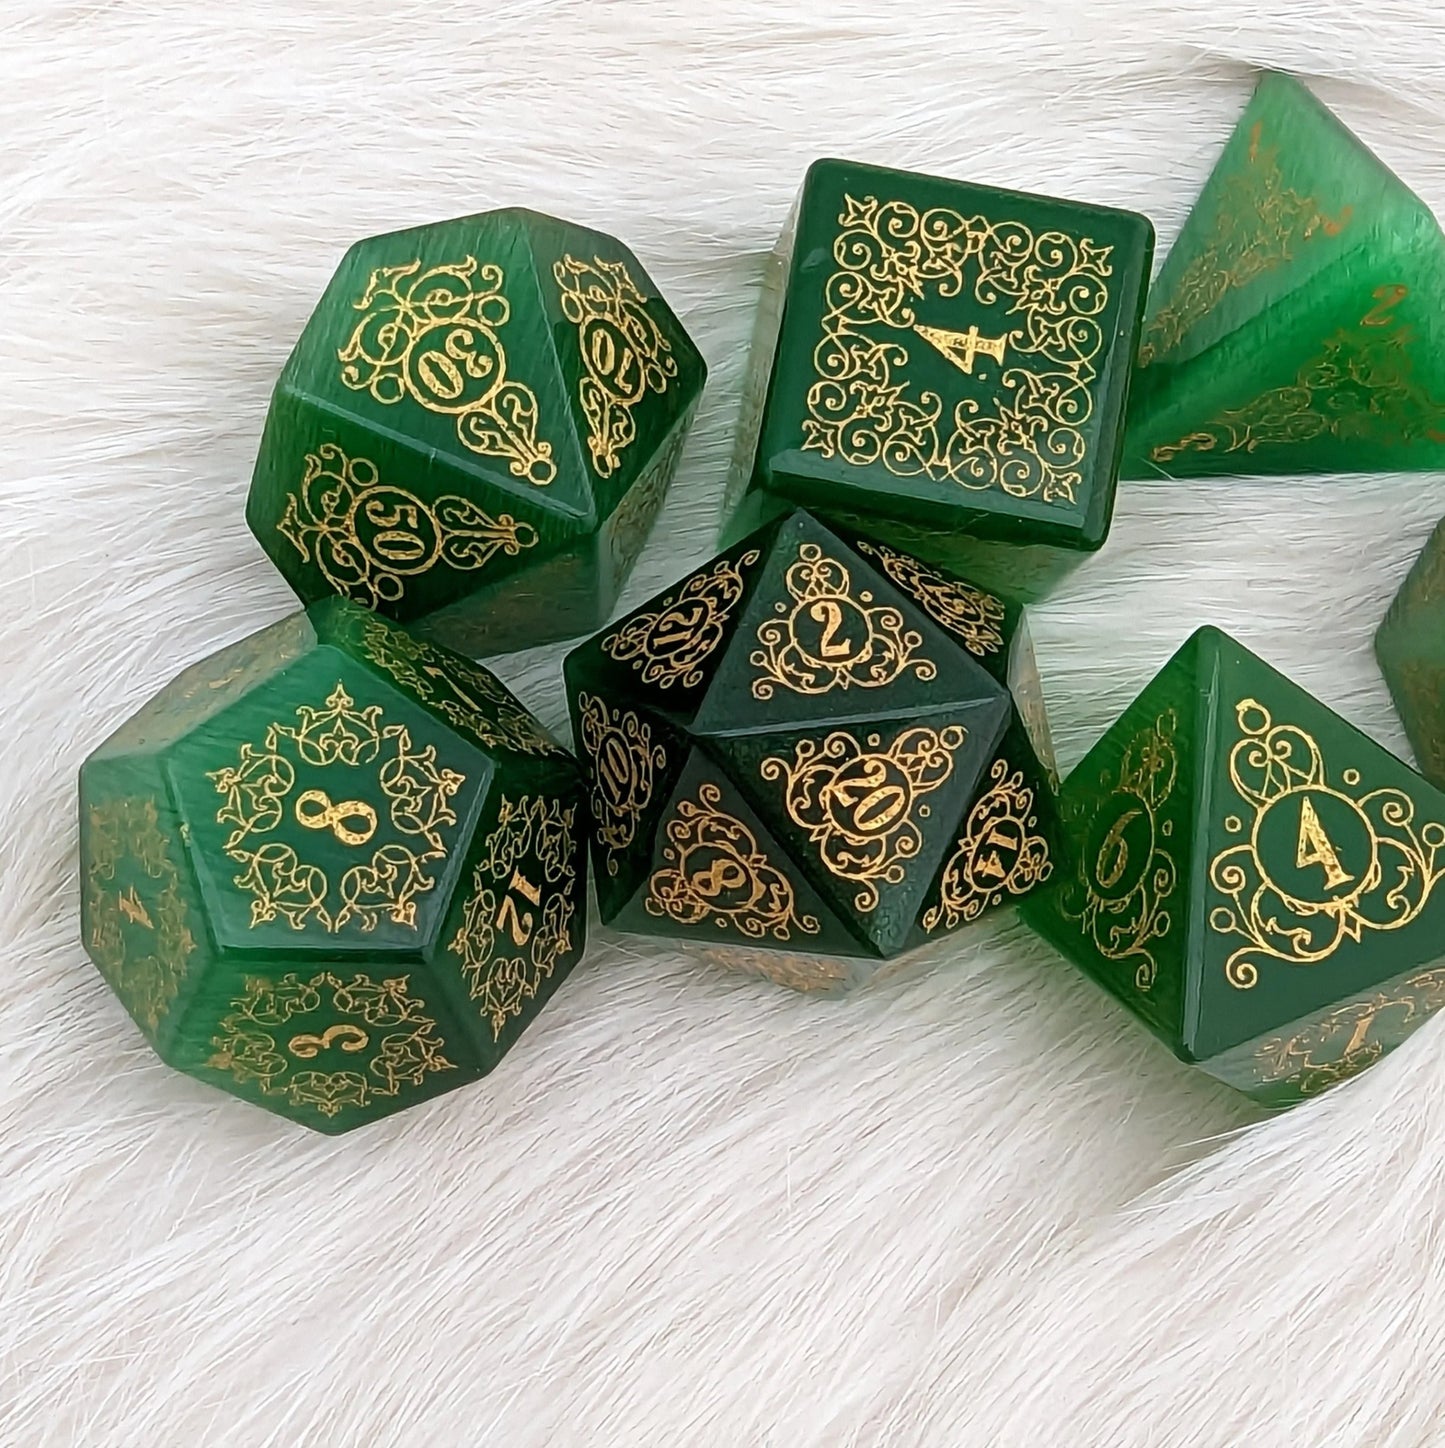 Garden Gate Green Cats Eye Gemstone - 7 Dice Set - The Fourth Place